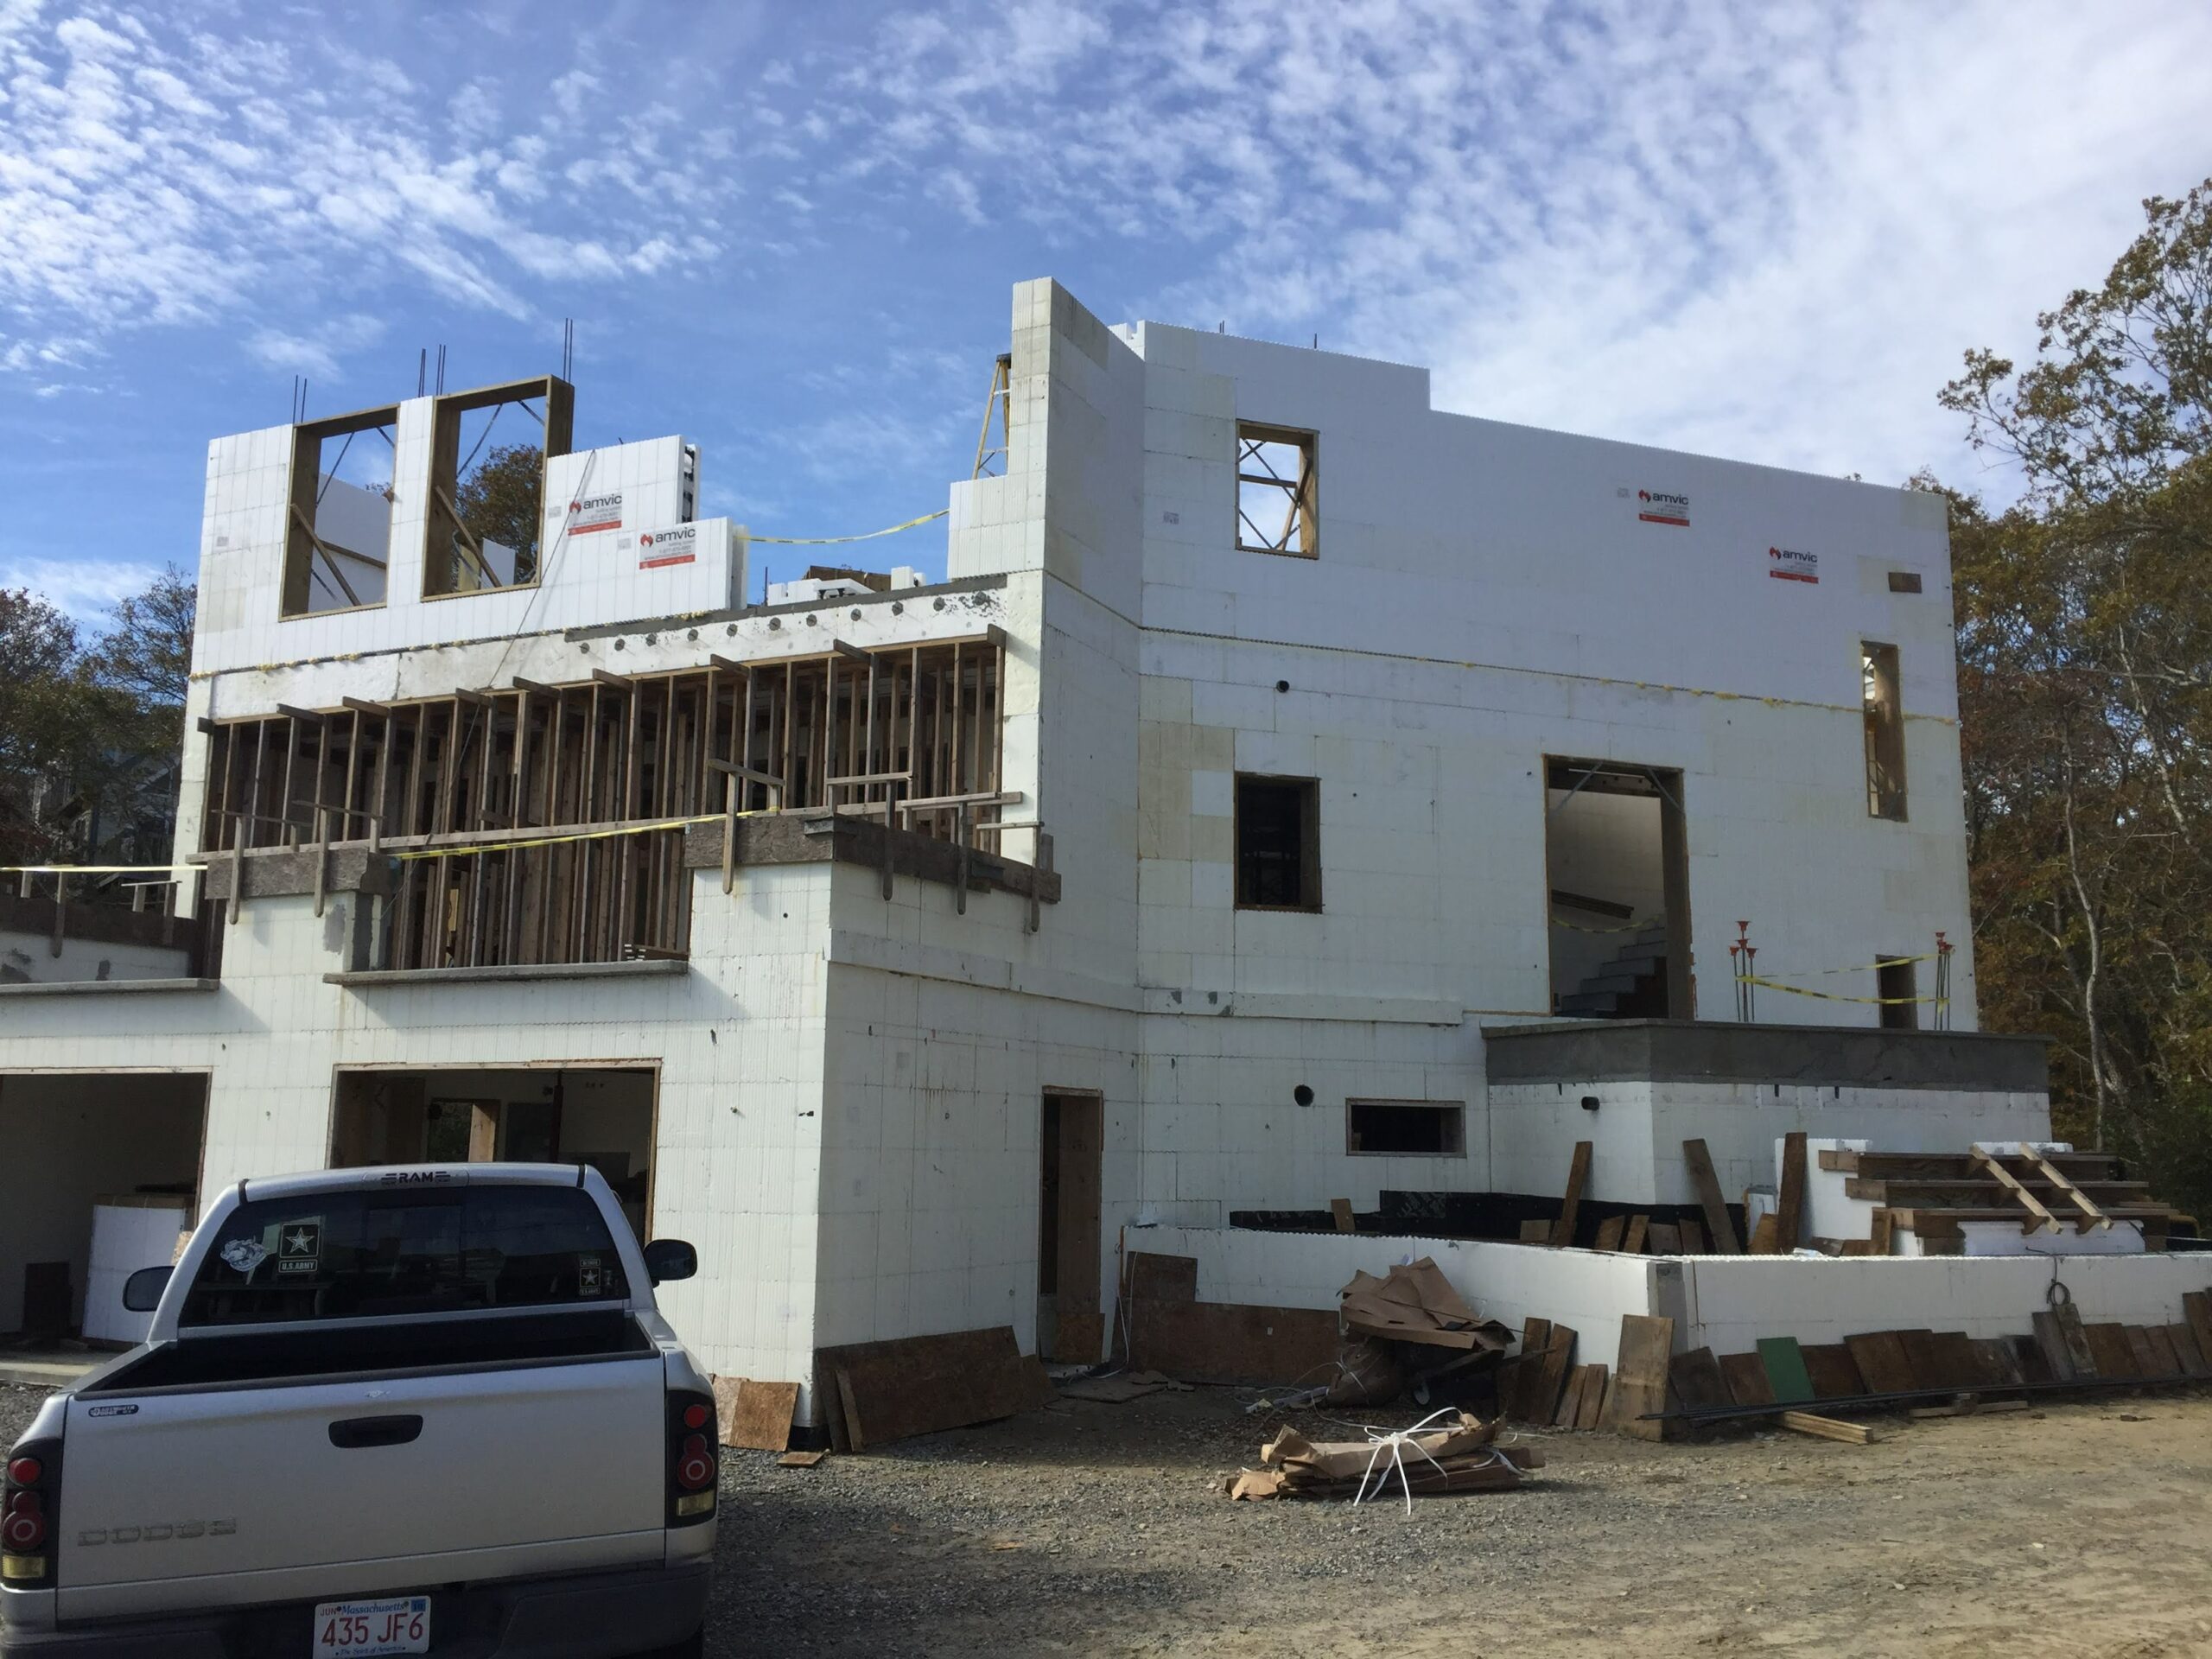 ICF Home seen as it is being built and still under construction